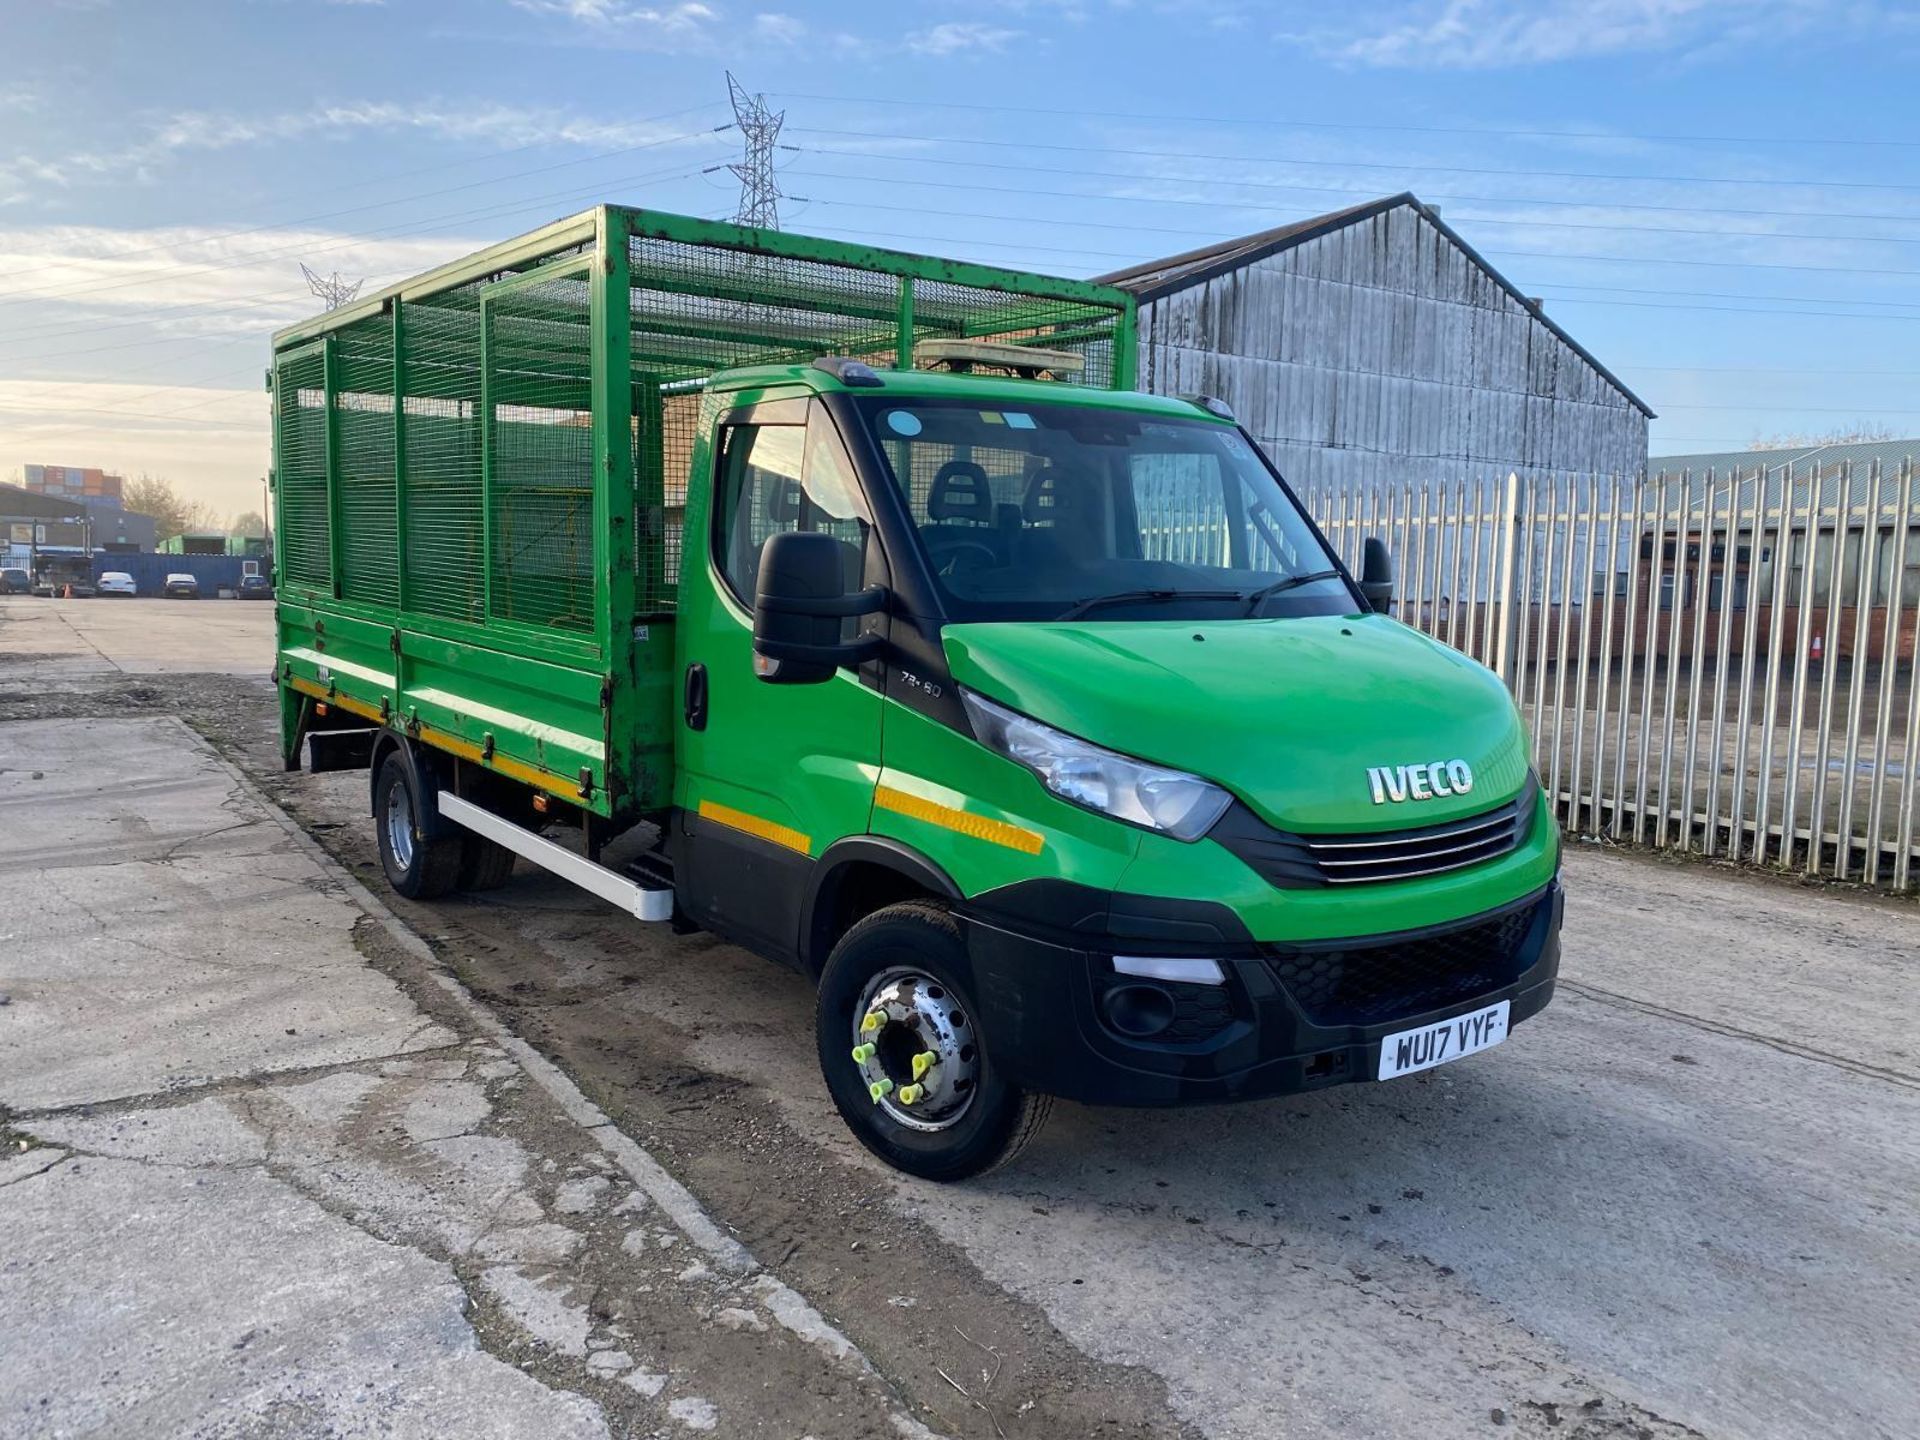 2017 IVECO DAILY 72C 180 7.2TON EURO6 CAGE FLATBED TRUCK WITH TAILLIFT - REQUIRES ATTENTION - Image 3 of 12